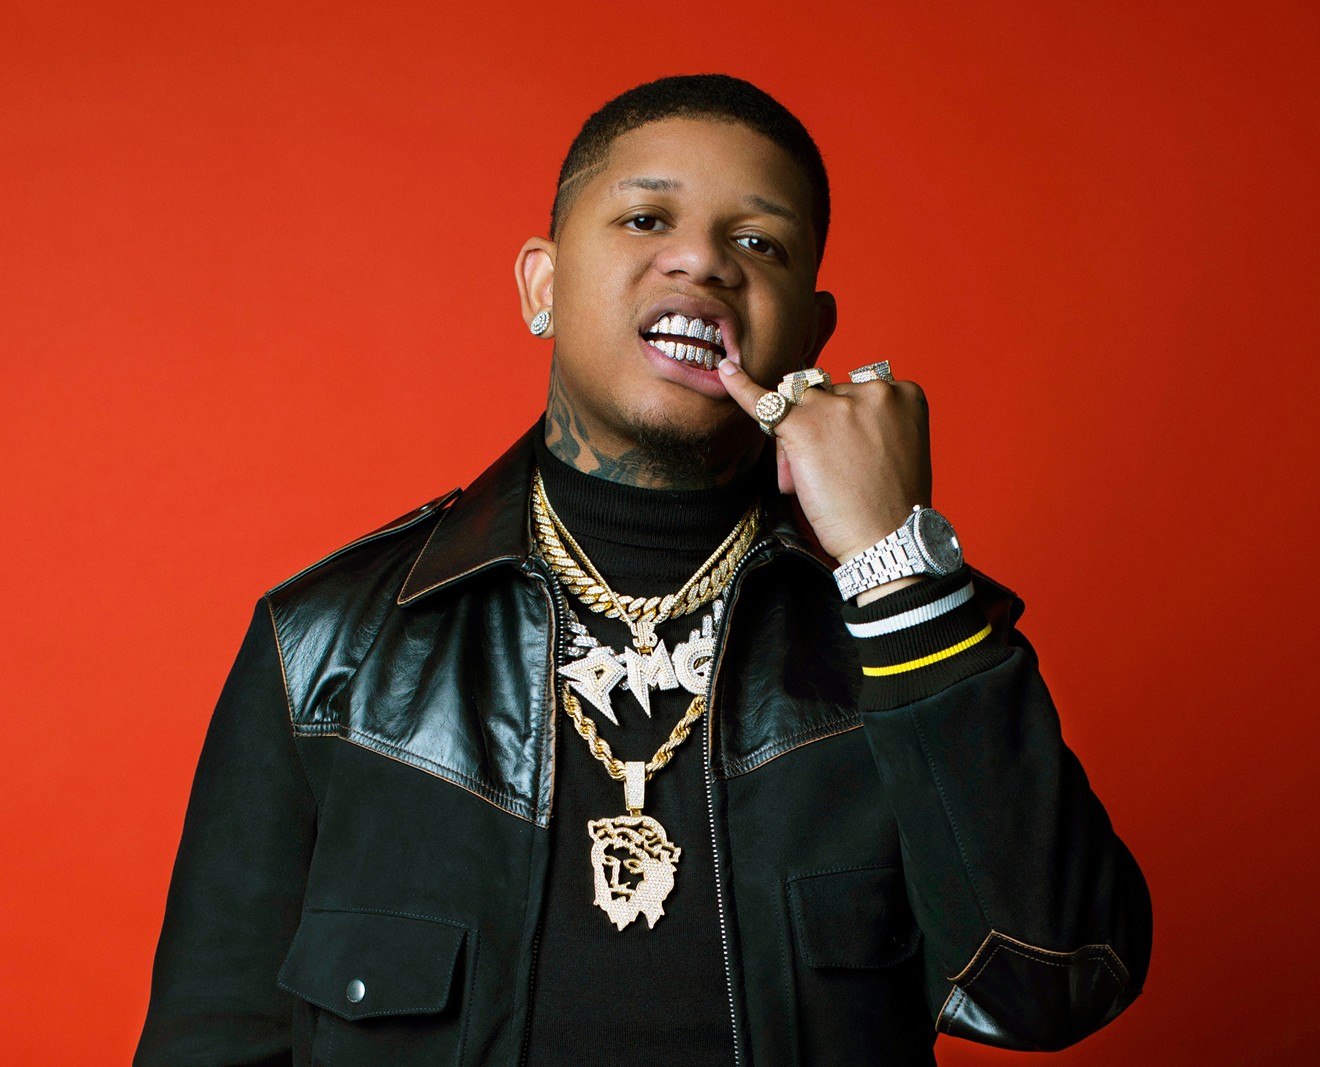 The Yella Beezy song, featuring Ty Dolla $ign, “Ay Ya Ya Ya”  shows why the rapper is the life of the party. Don't miss him this New Year's Eve.